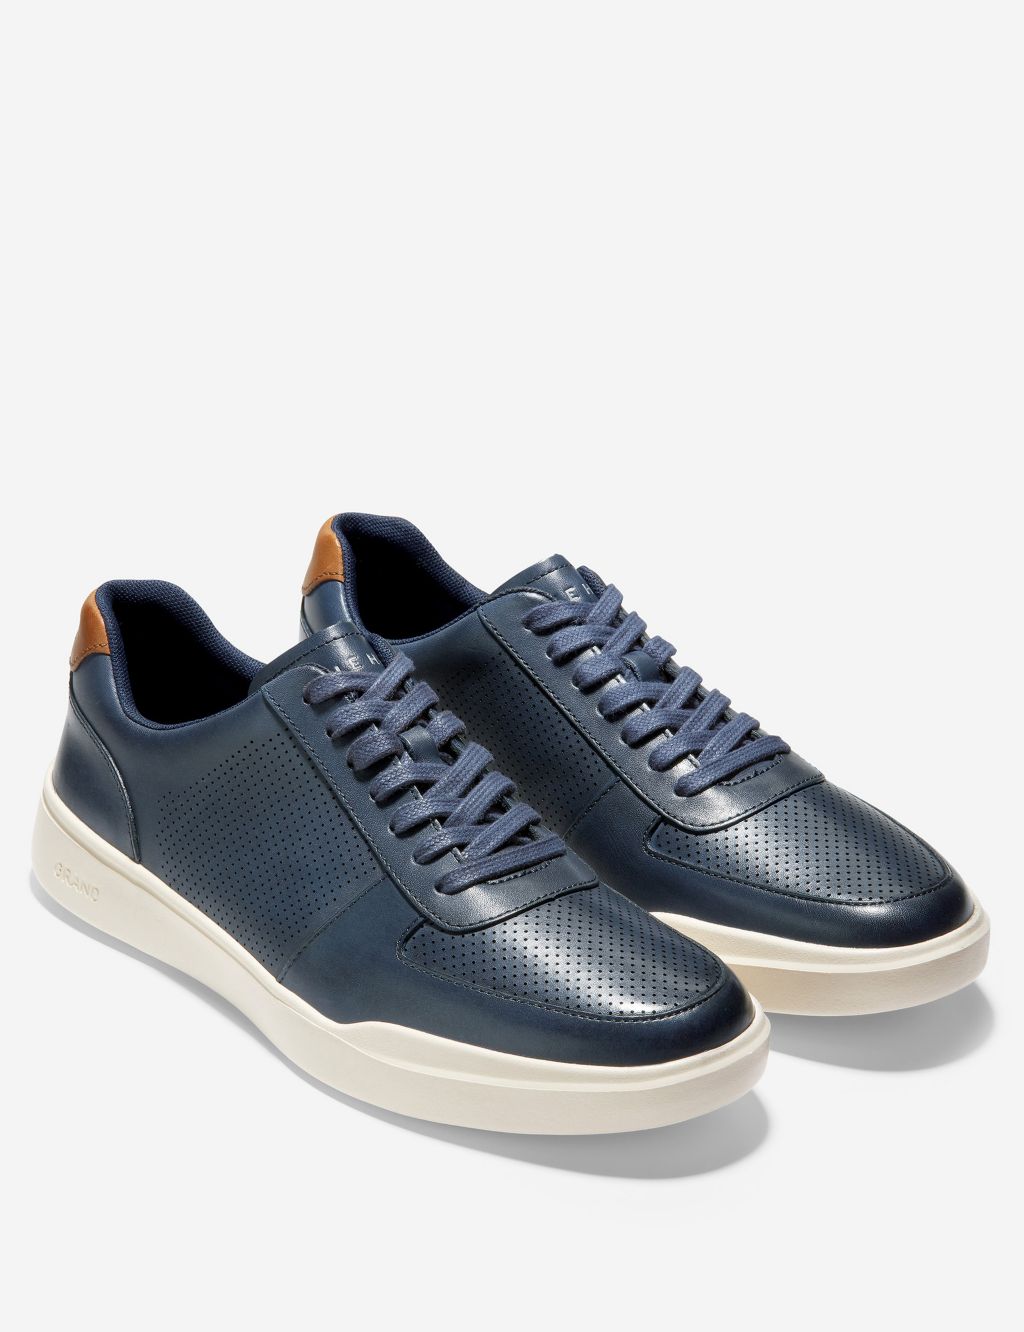 Grand Crosscourt Leather Lace Up Trainers image 2